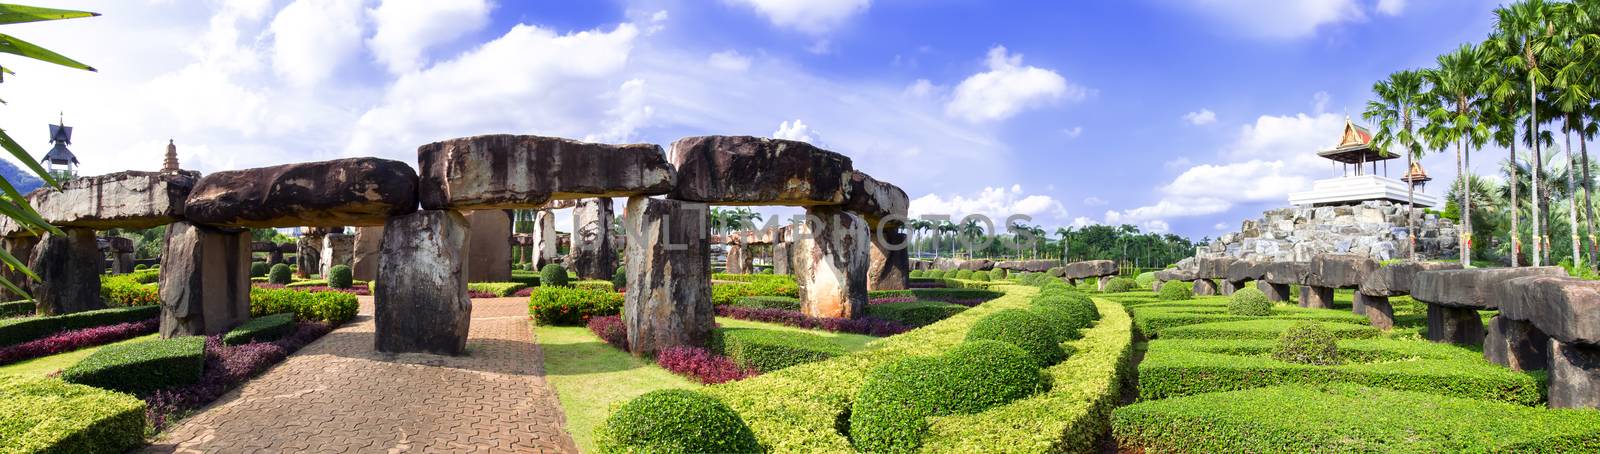 Panorama of Stonehenge and Pavillion in Nong Nooch Garden. 